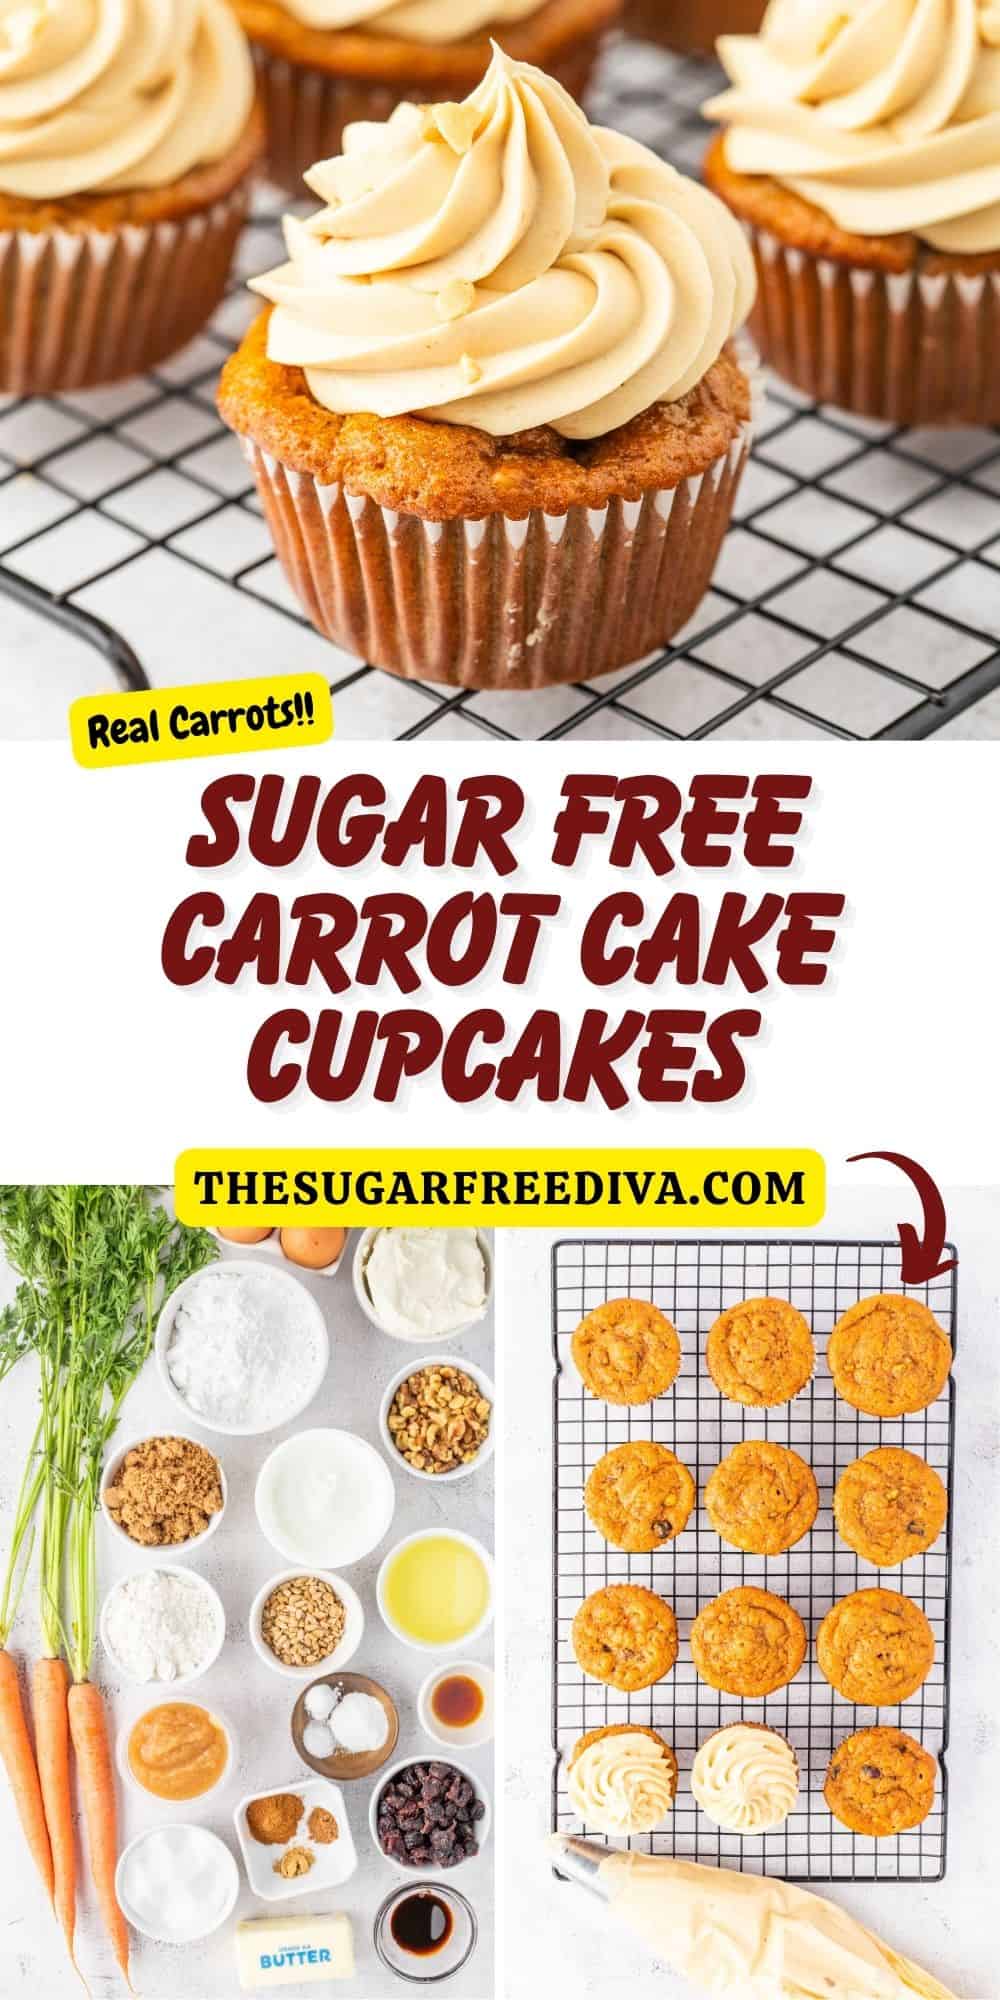 Sugar Free Carrot Cake Cupcakes, a delicious dessert or snack recipe made with grated carrots, spices, yogurt, and no added sugar.